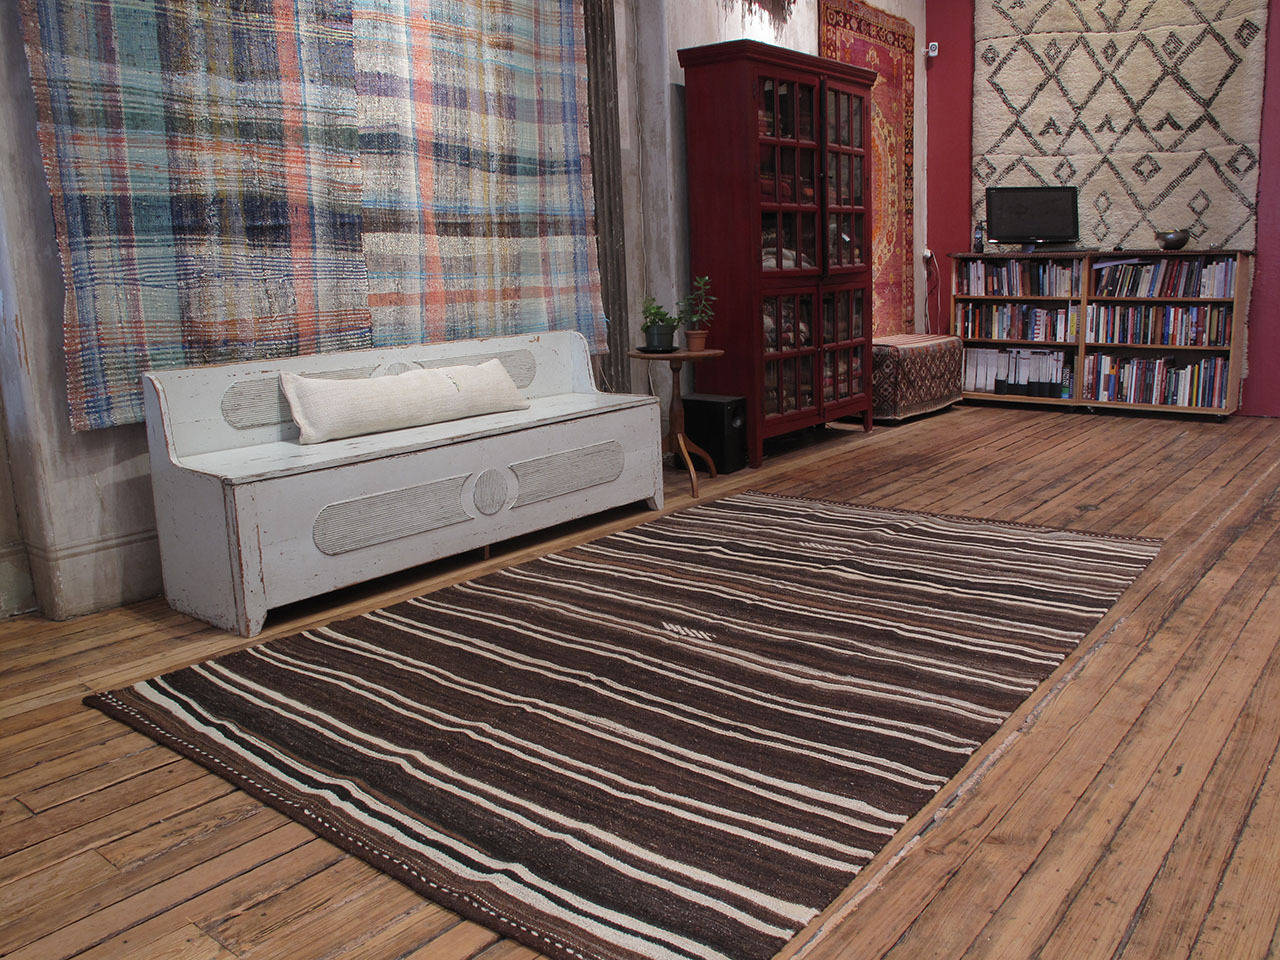 A simple tribal floor cover from Central Turkey, woven entirely with natural brown wool. A coarse, almost Primitive weaving with great modern/contemporary appeal. Very sturdy and suitable for high traffic.